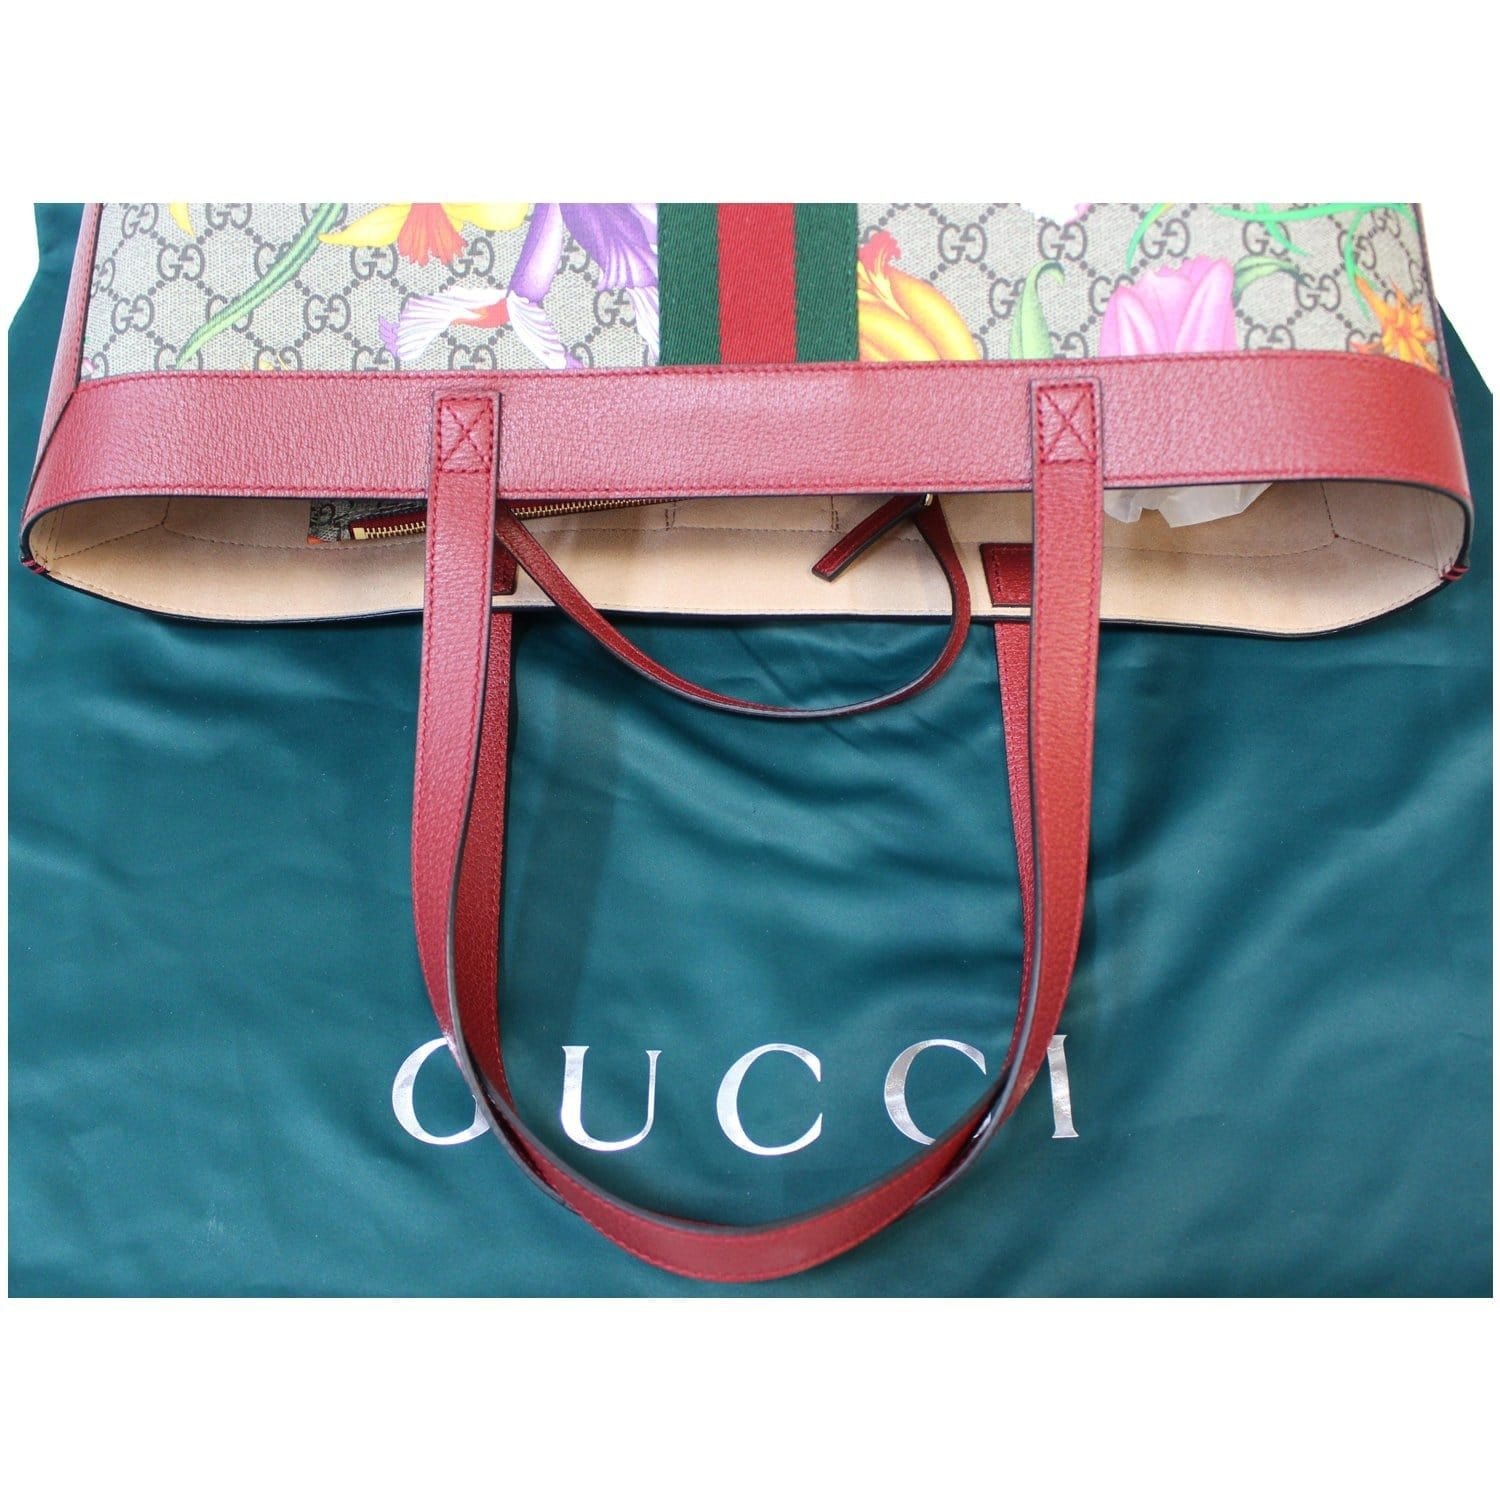 Gucci Ophidia Gg Medium Tote Bag in Green